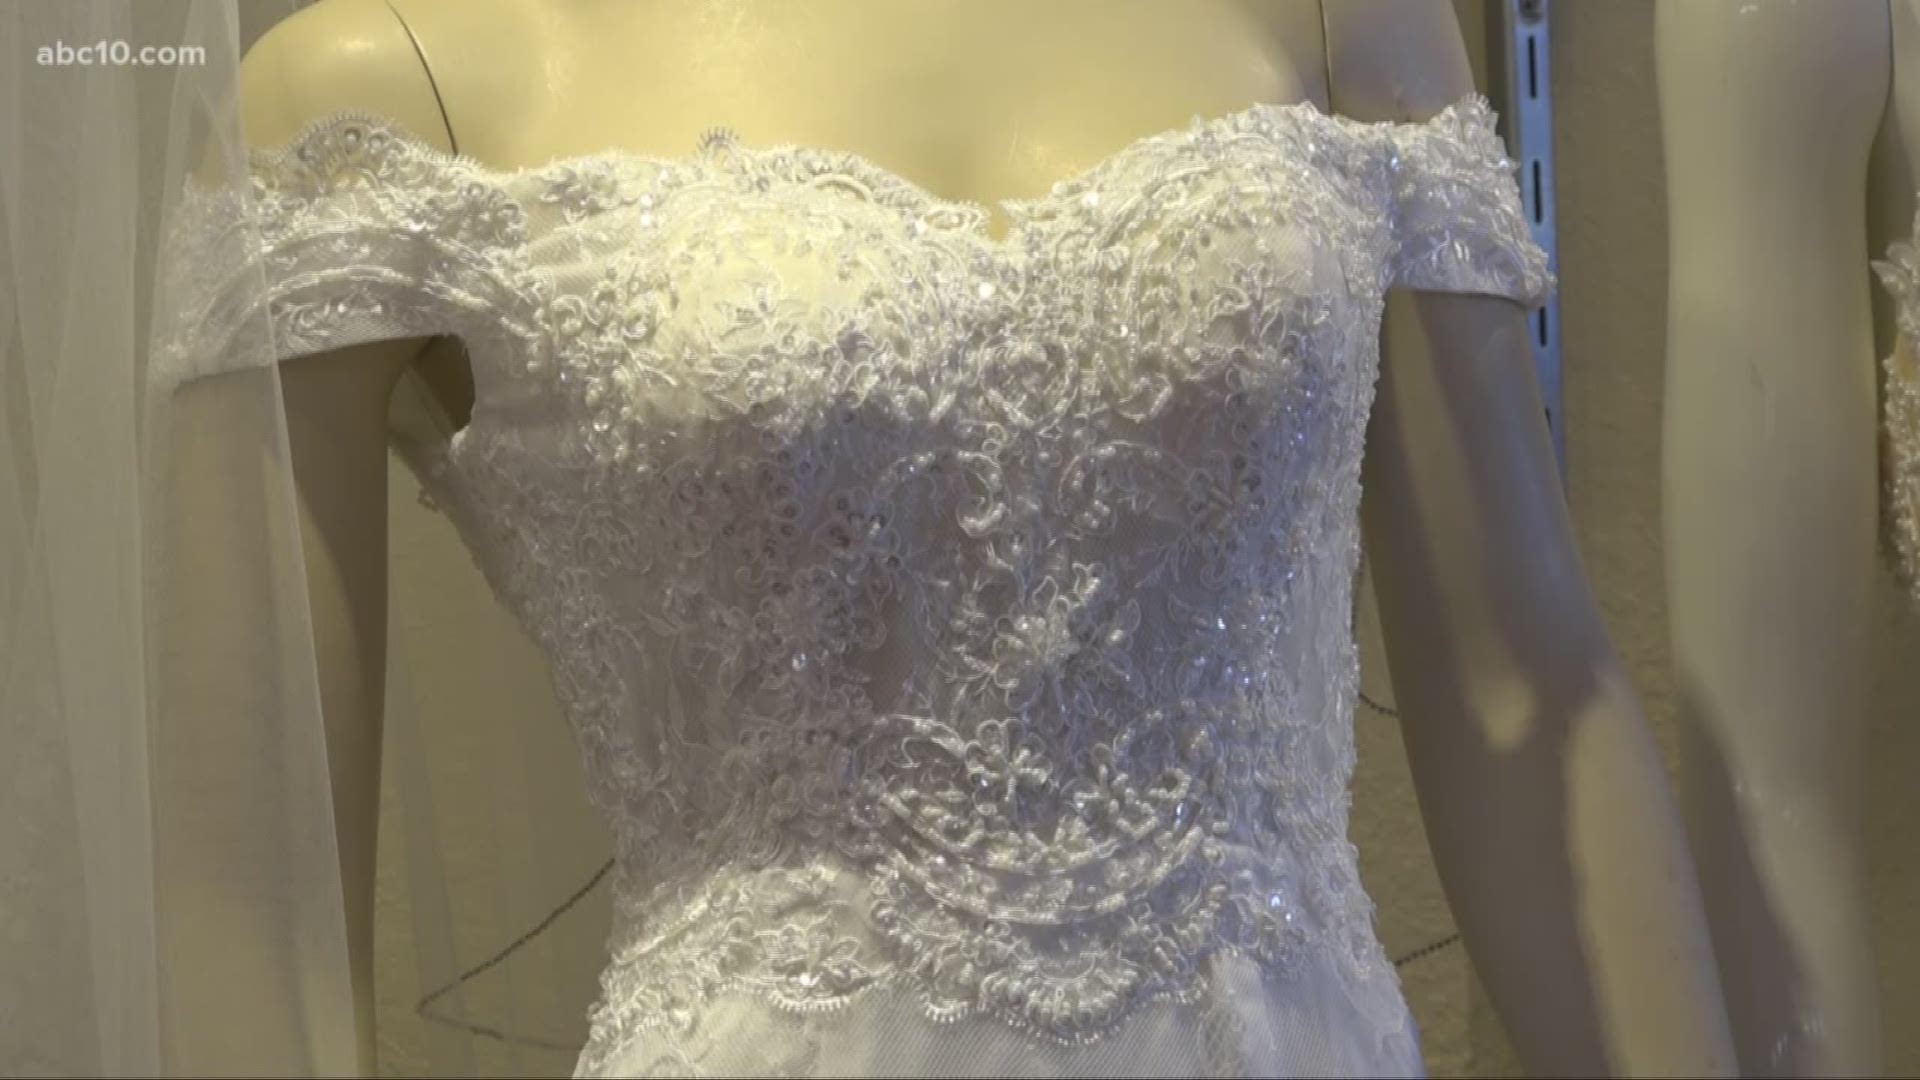 Elegant Designs Bridal is having a hard time ordering wedding dress materials from China due to concerns over the coronavirus.